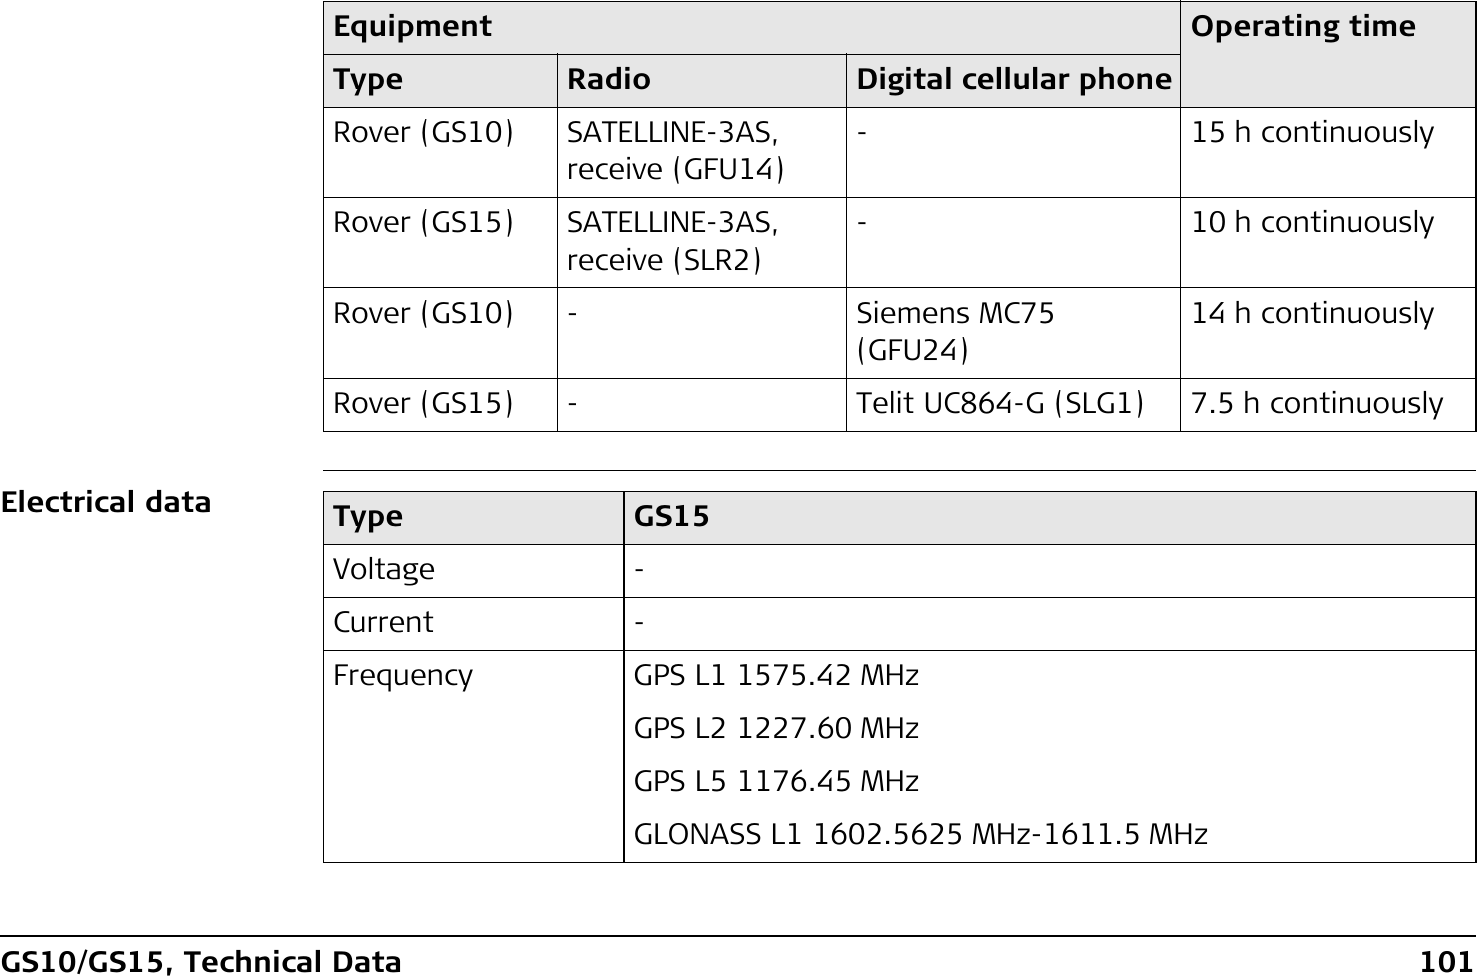 GS10/GS15, Technical Data 101Electrical dataRover (GS10) SATELLINE-3AS, receive (GFU14)- 15 h continuouslyRover (GS15) SATELLINE-3AS, receive (SLR2)- 10 h continuouslyRover (GS10) - Siemens MC75 (GFU24)14 h continuouslyRover (GS15) - Telit UC864-G (SLG1) 7.5 h continuouslyEquipment Operating timeType Radio Digital cellular phoneType GS15Voltage -Current -Frequency GPS L1 1575.42 MHzGPS L2 1227.60 MHzGPS L5 1176.45 MHzGLONASS L1 1602.5625 MHz-1611.5 MHz